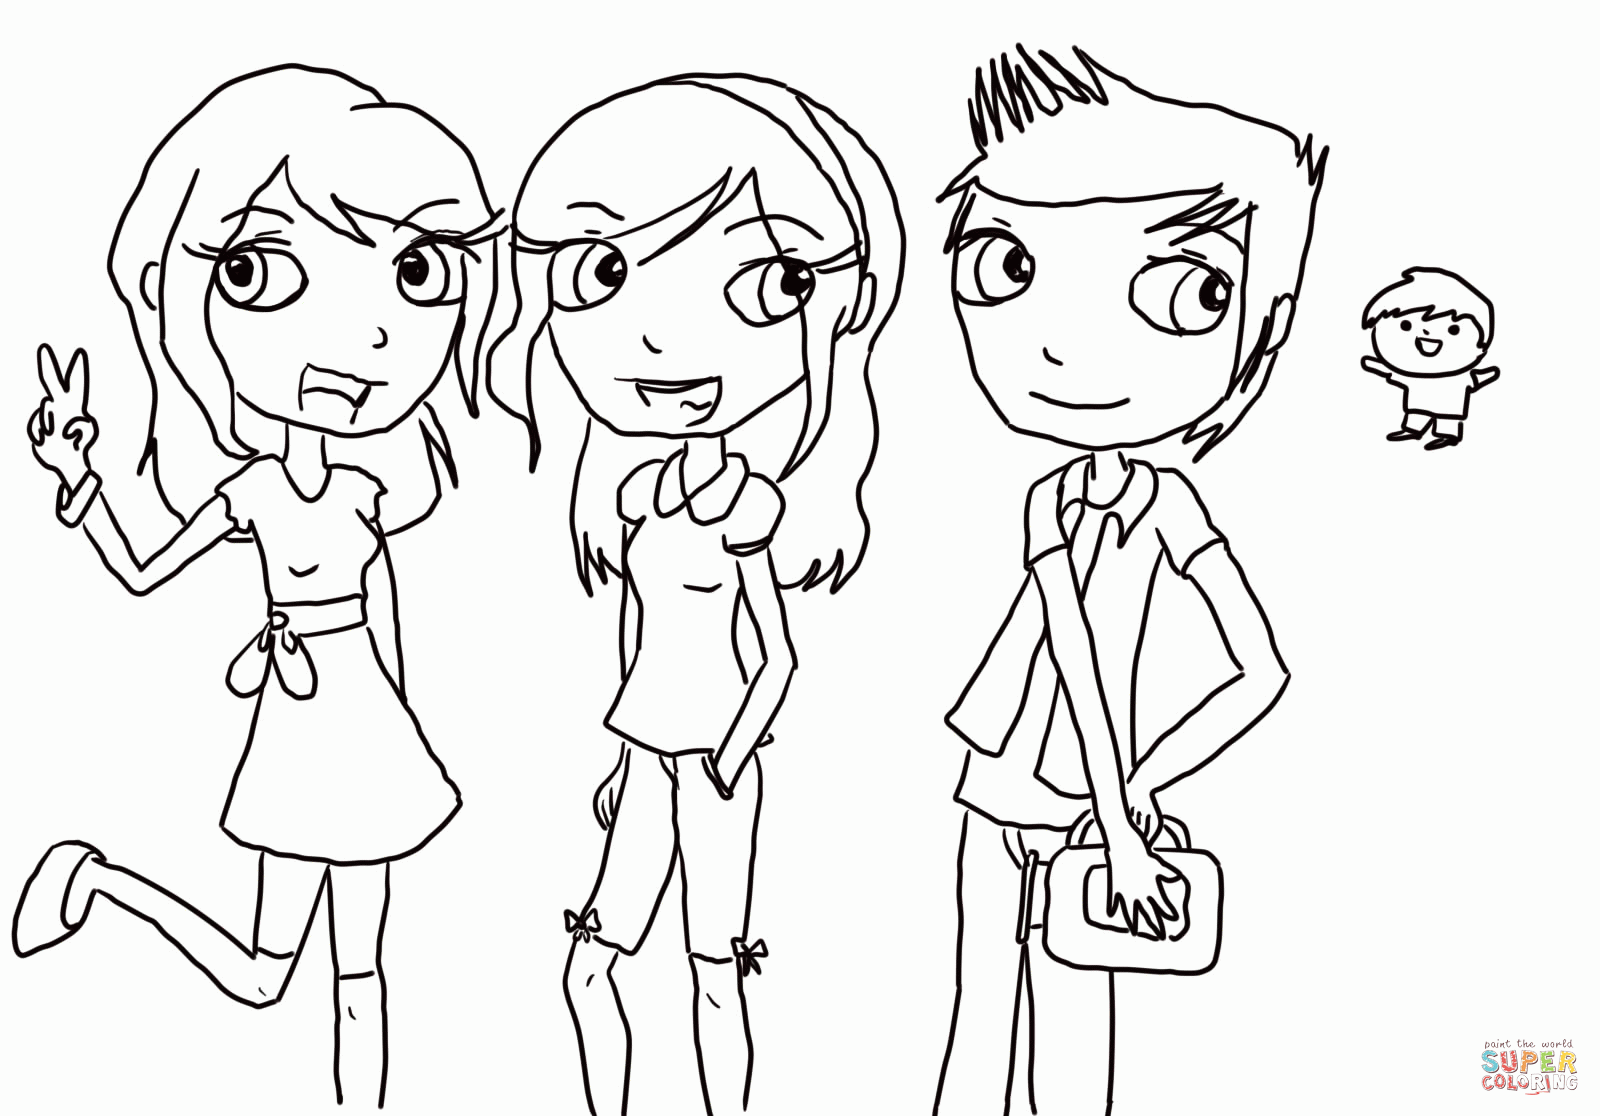 Icarly With Victorious Coloring Pages - High Quality Coloring Pages.